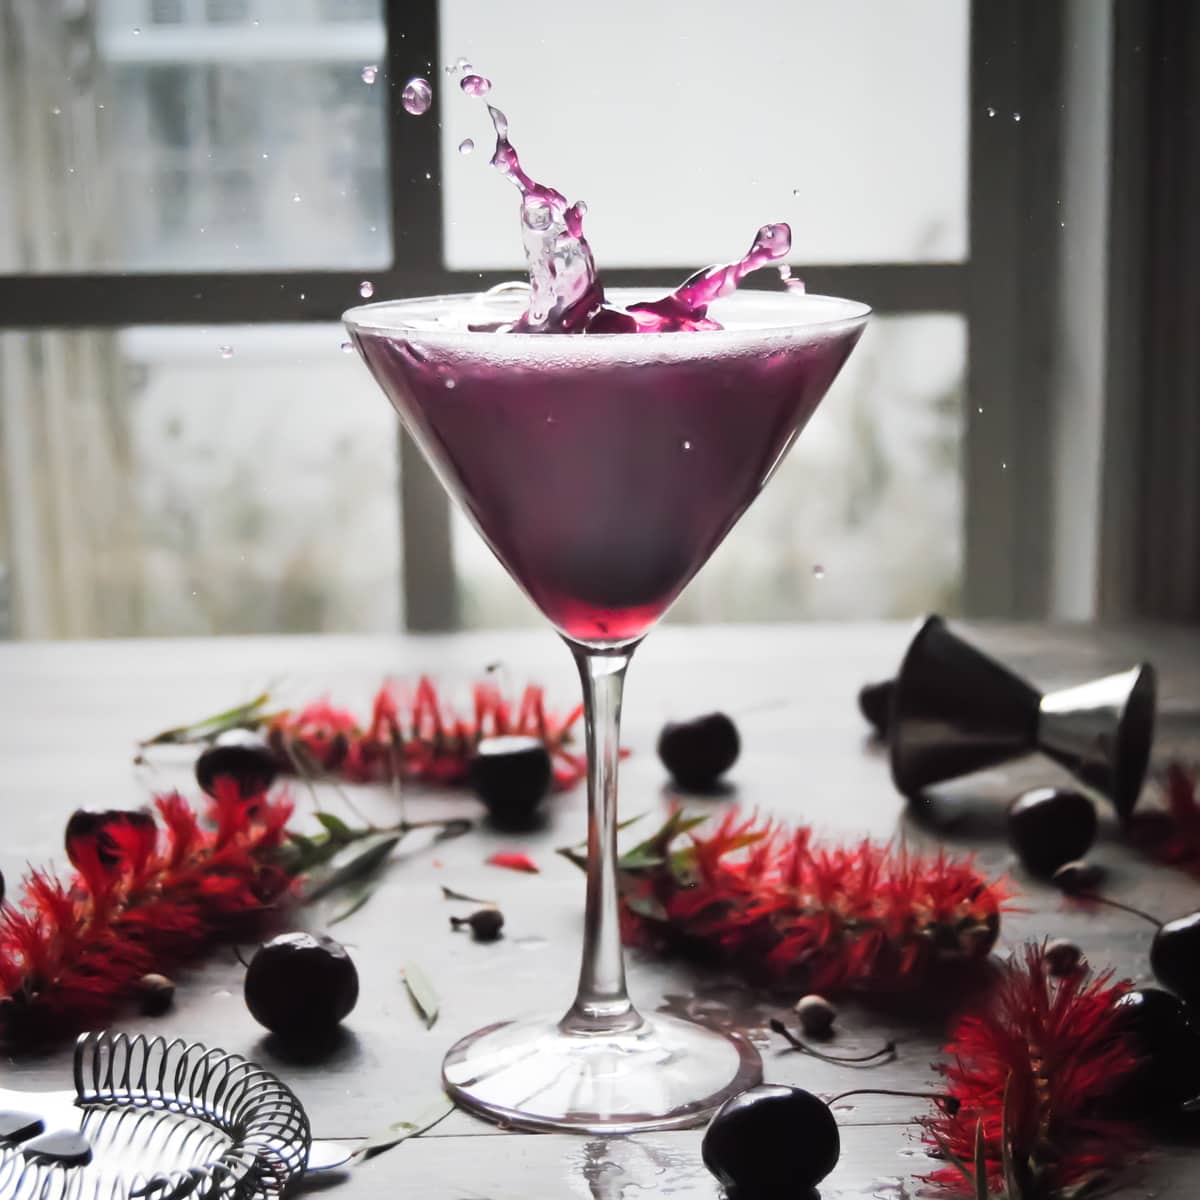 a martini glass with sweet cherry martini cocktail, garnished with cherries